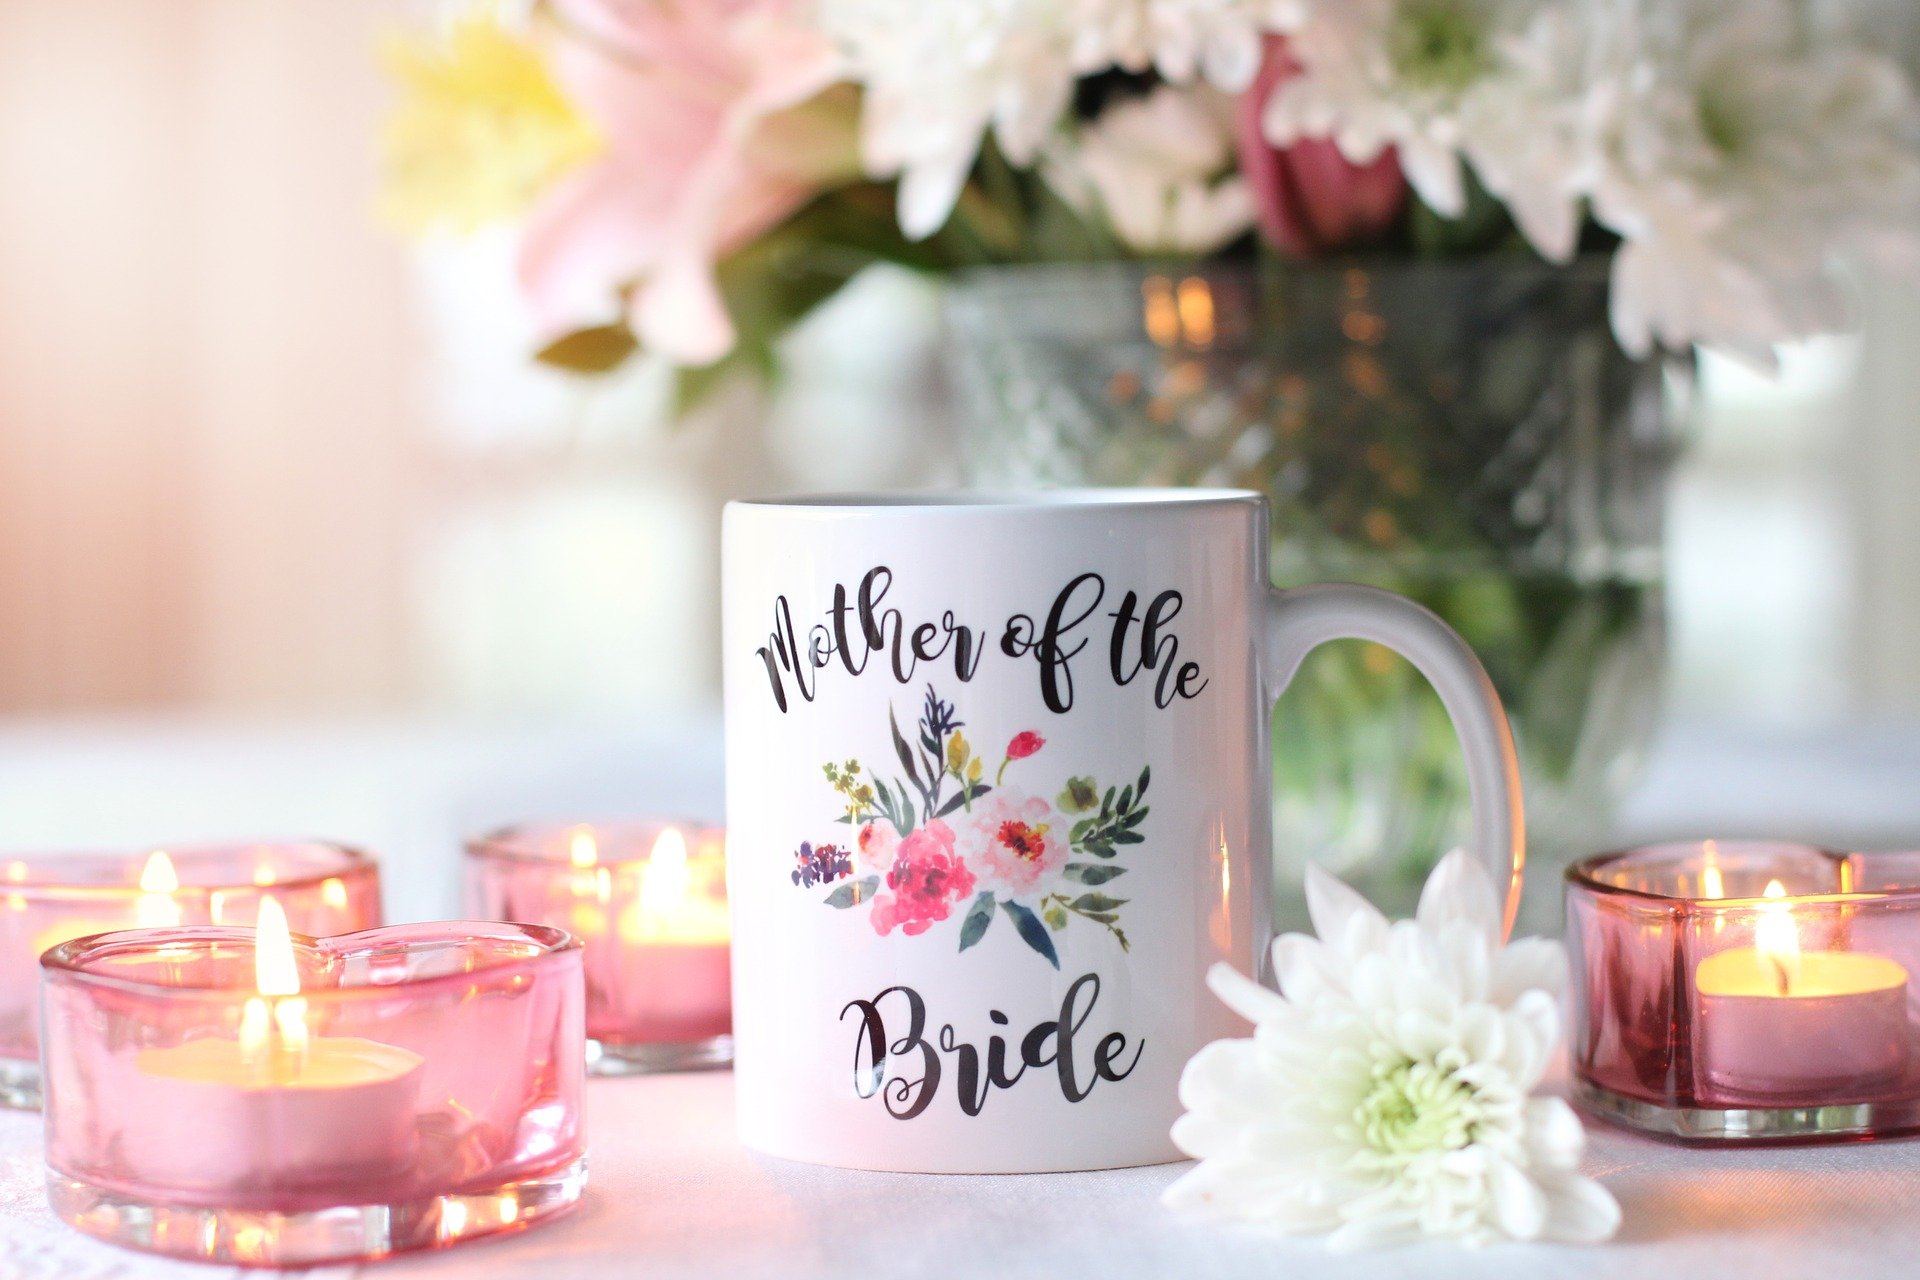 Mother of the Bride cup at a wedding. | Source: TerriC/Pixabay 